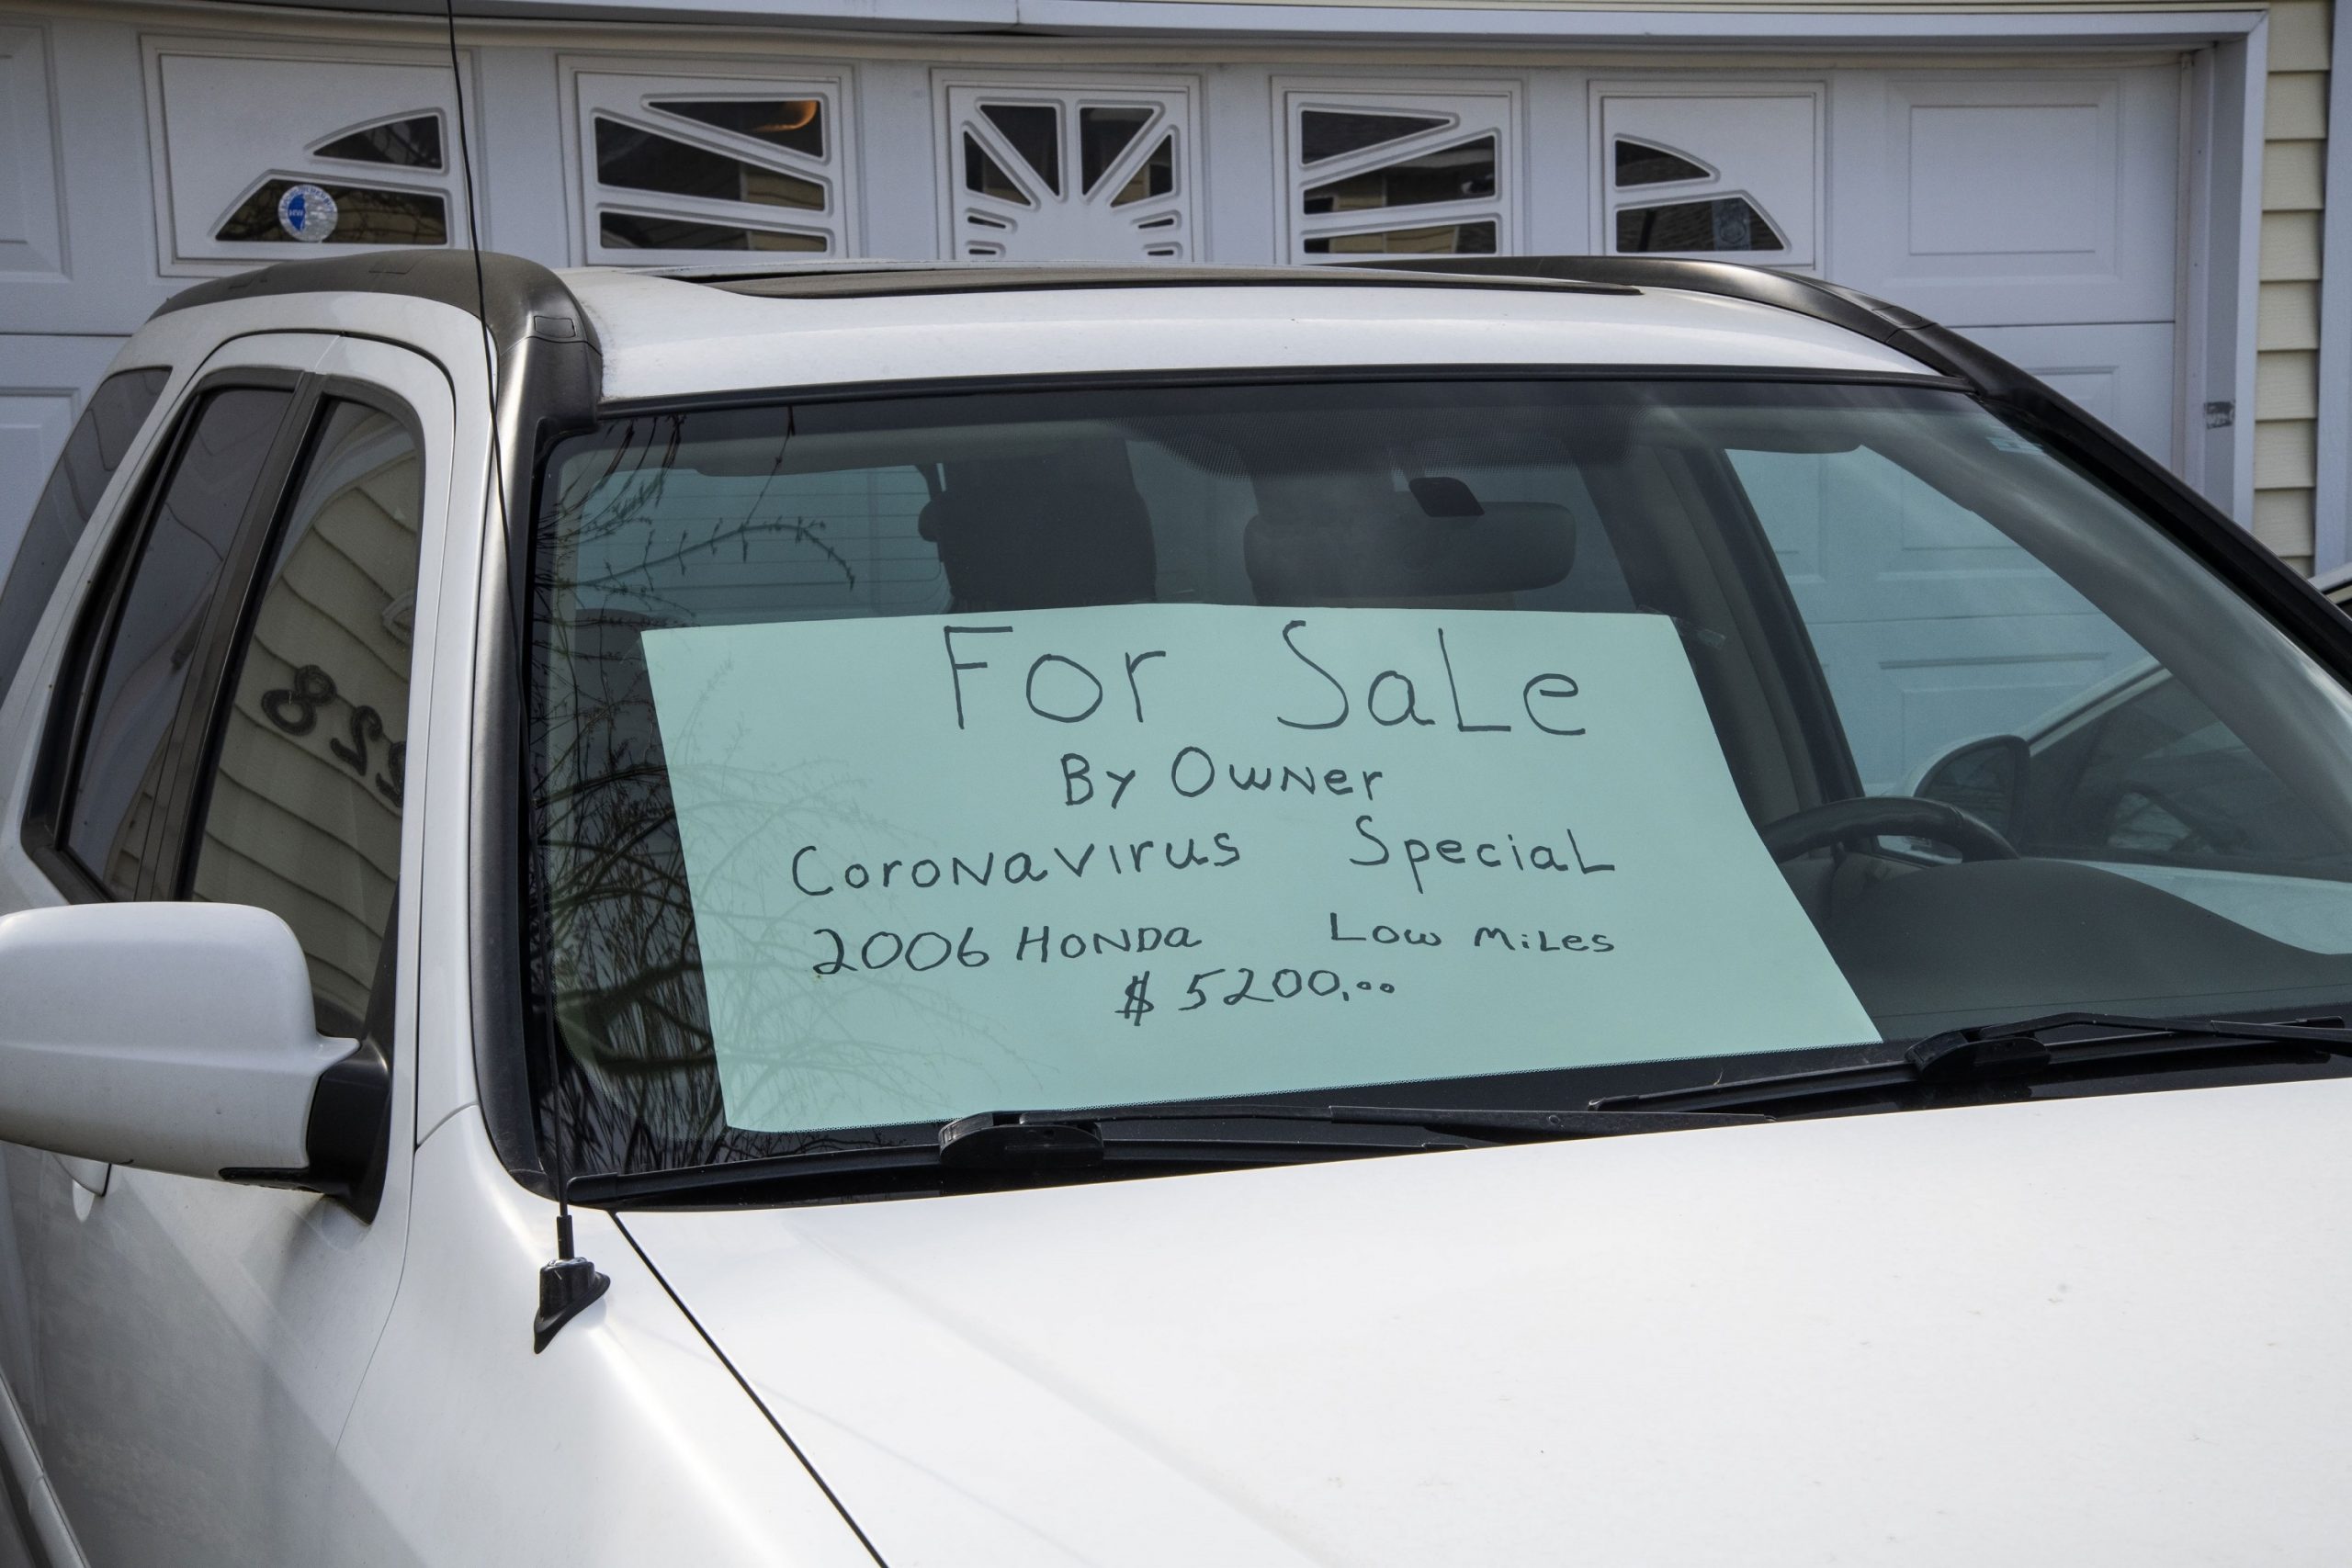 A for sale sign in the window of a vehicle